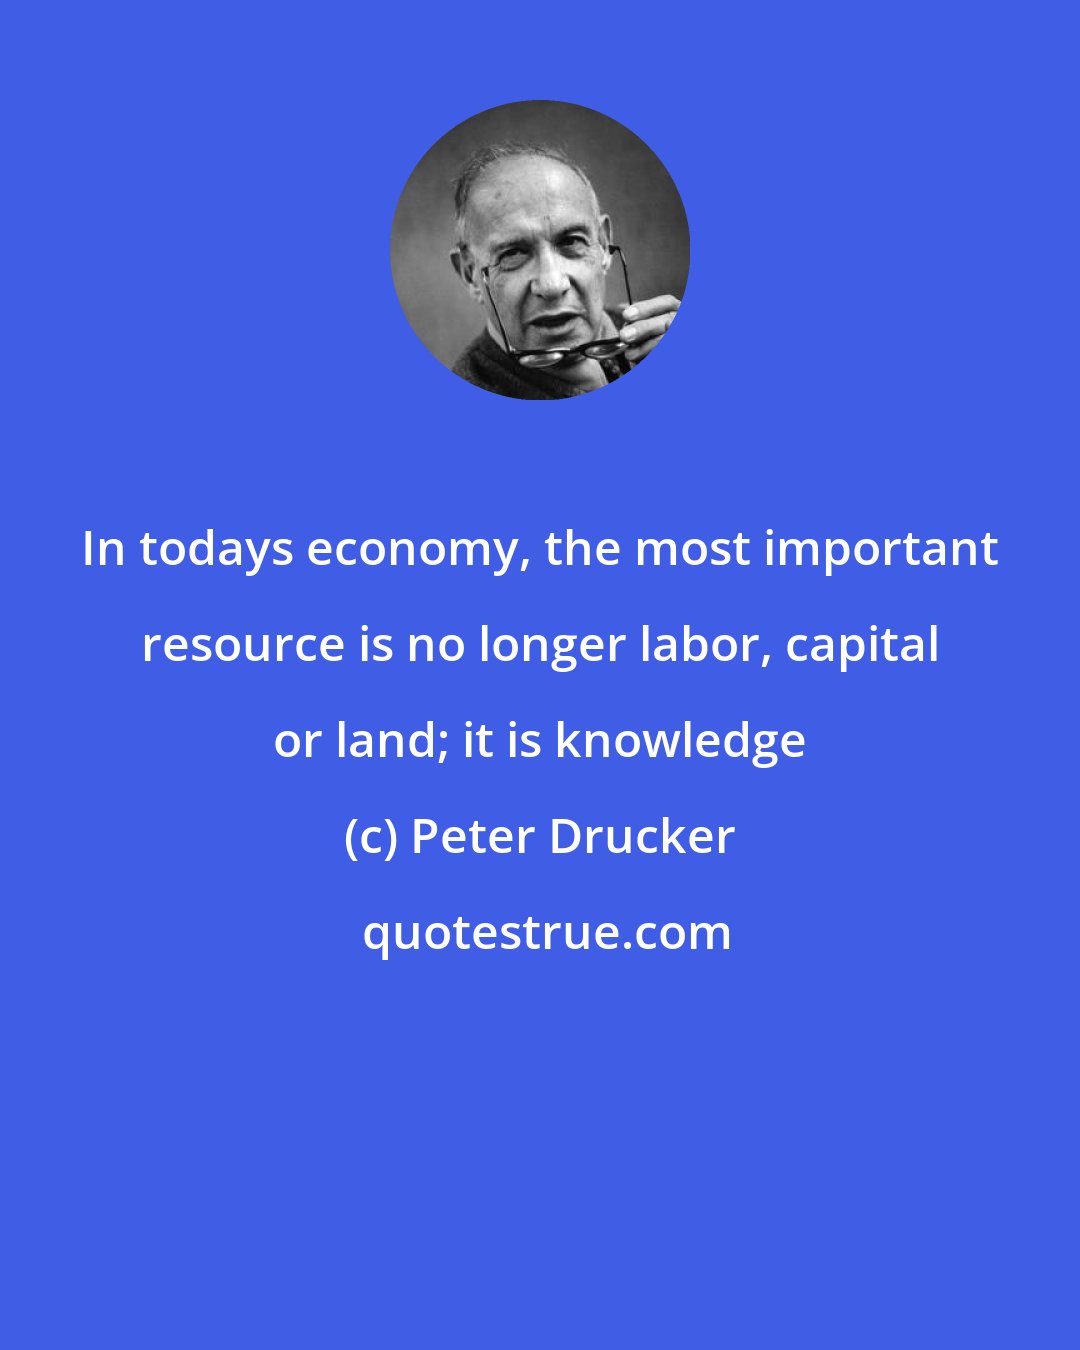 Peter Drucker: In todays economy, the most important resource is no longer labor, capital or land; it is knowledge